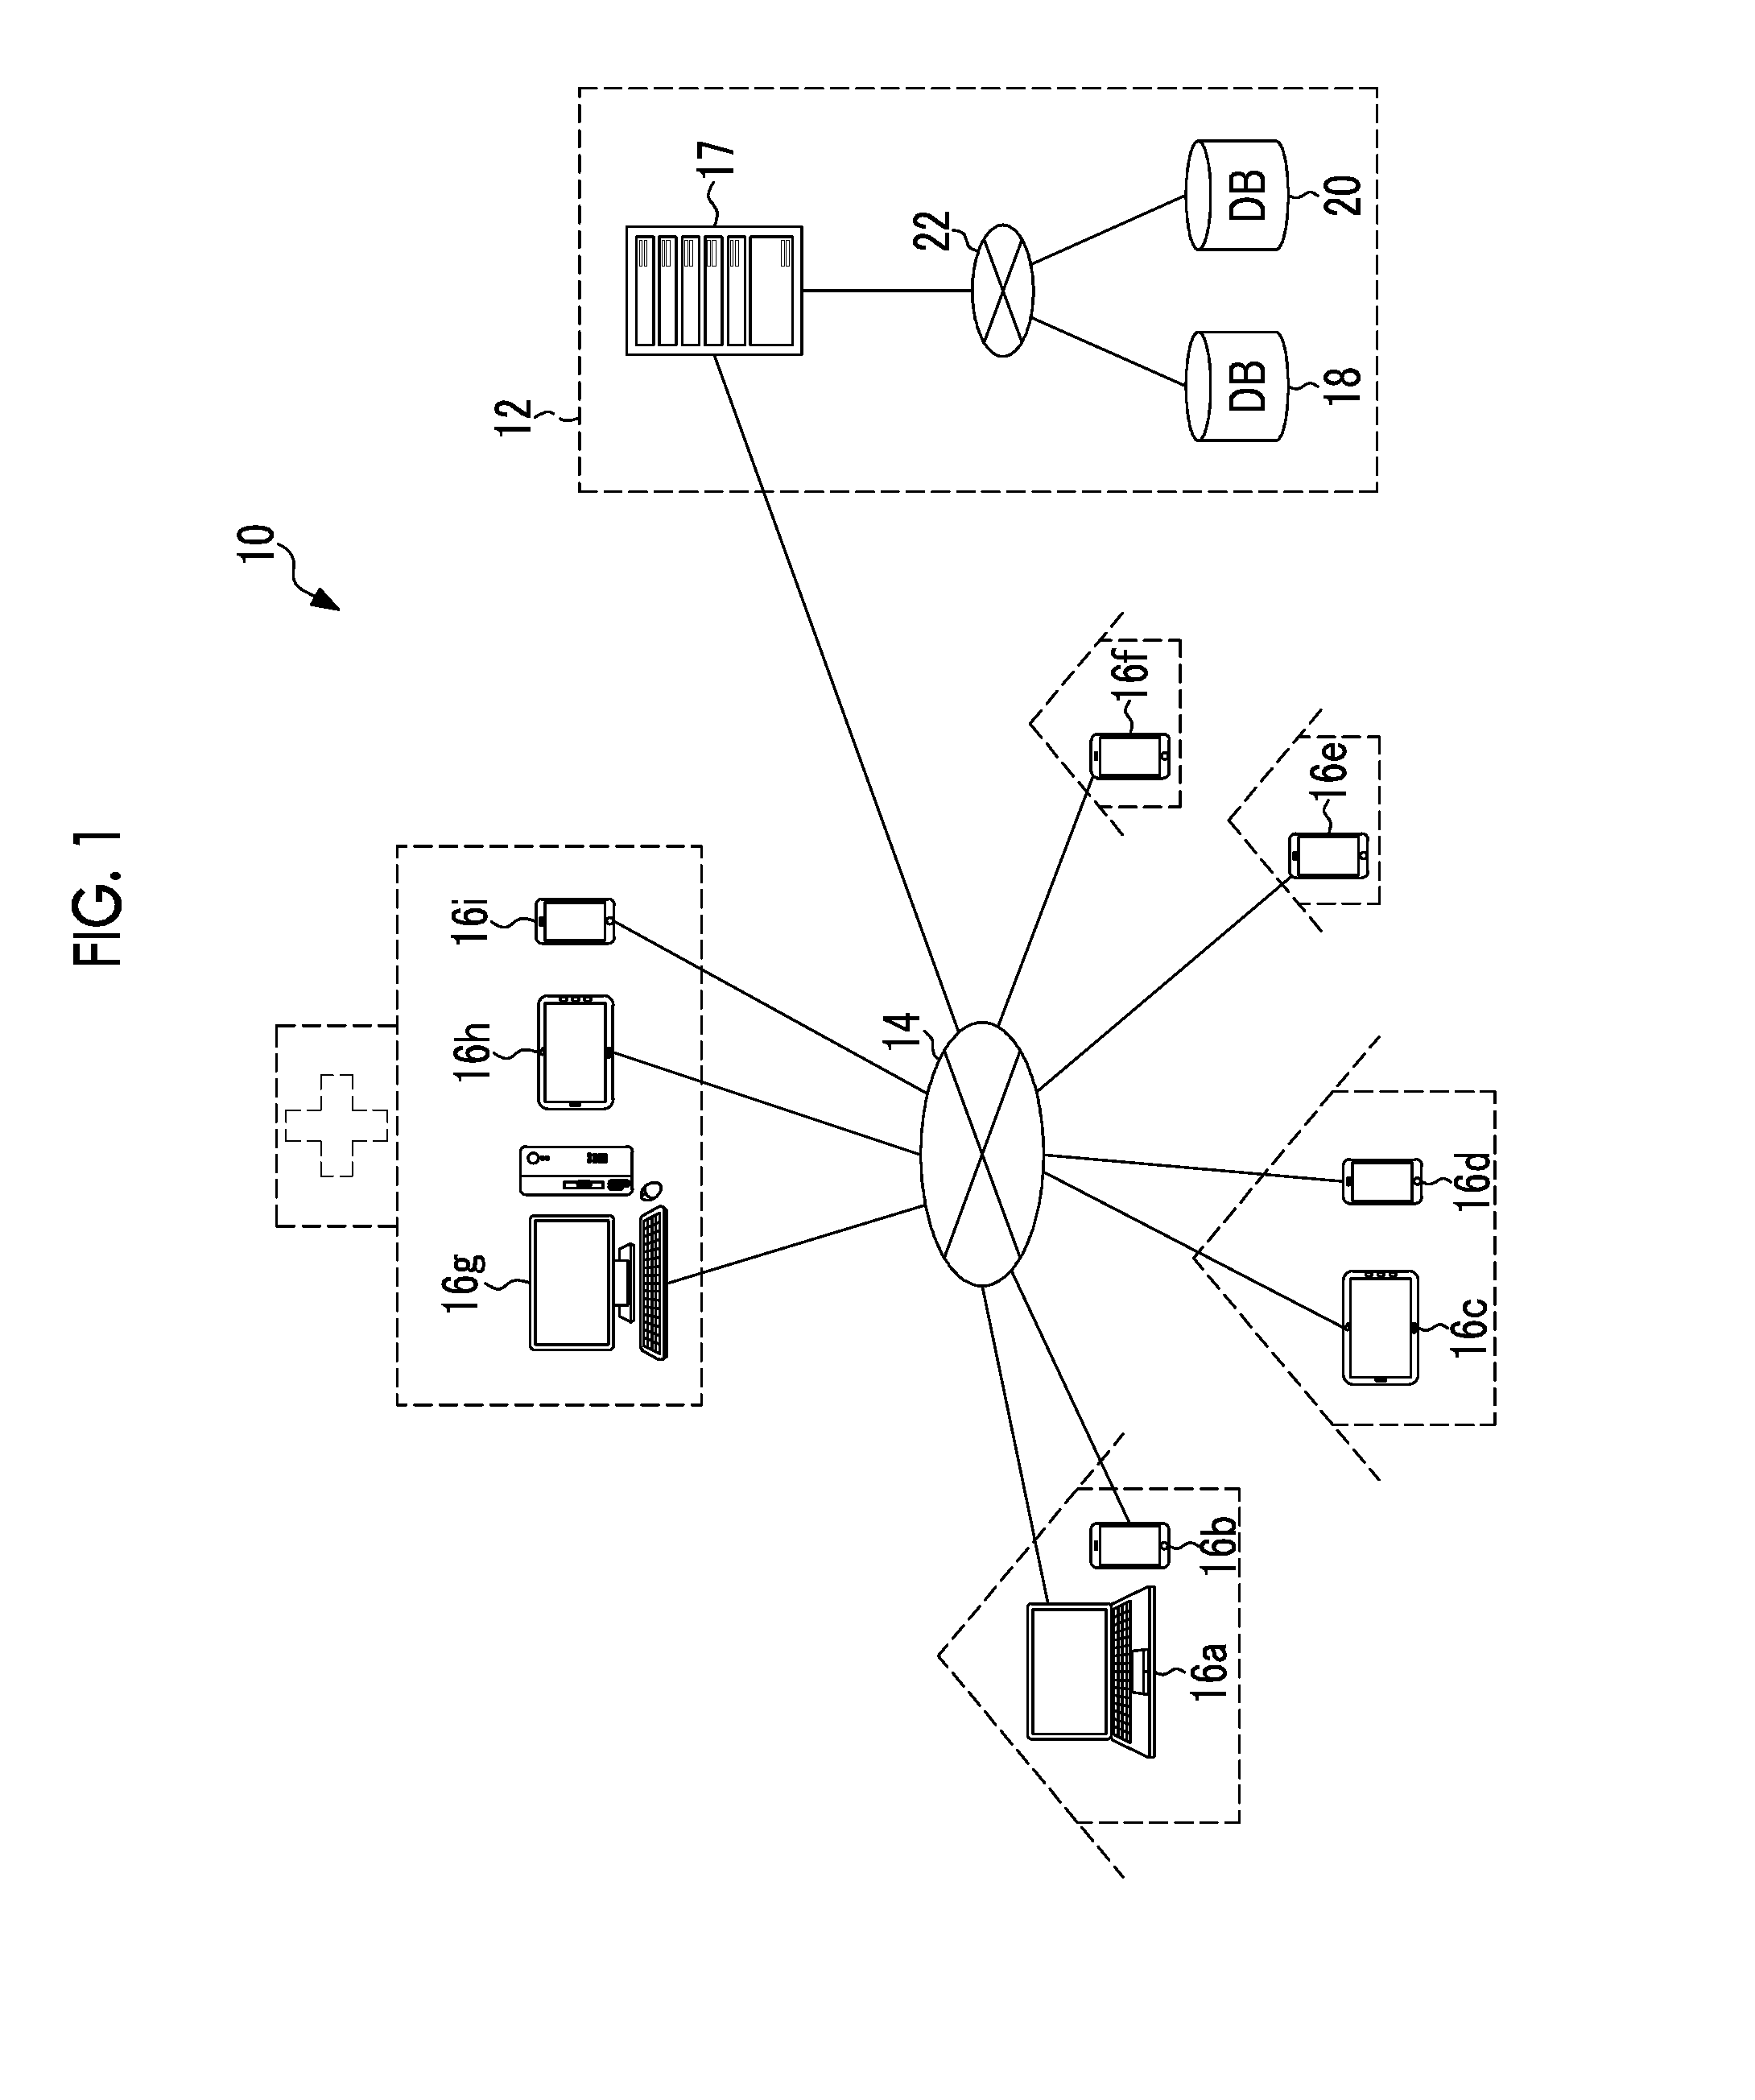 Clinical path management device